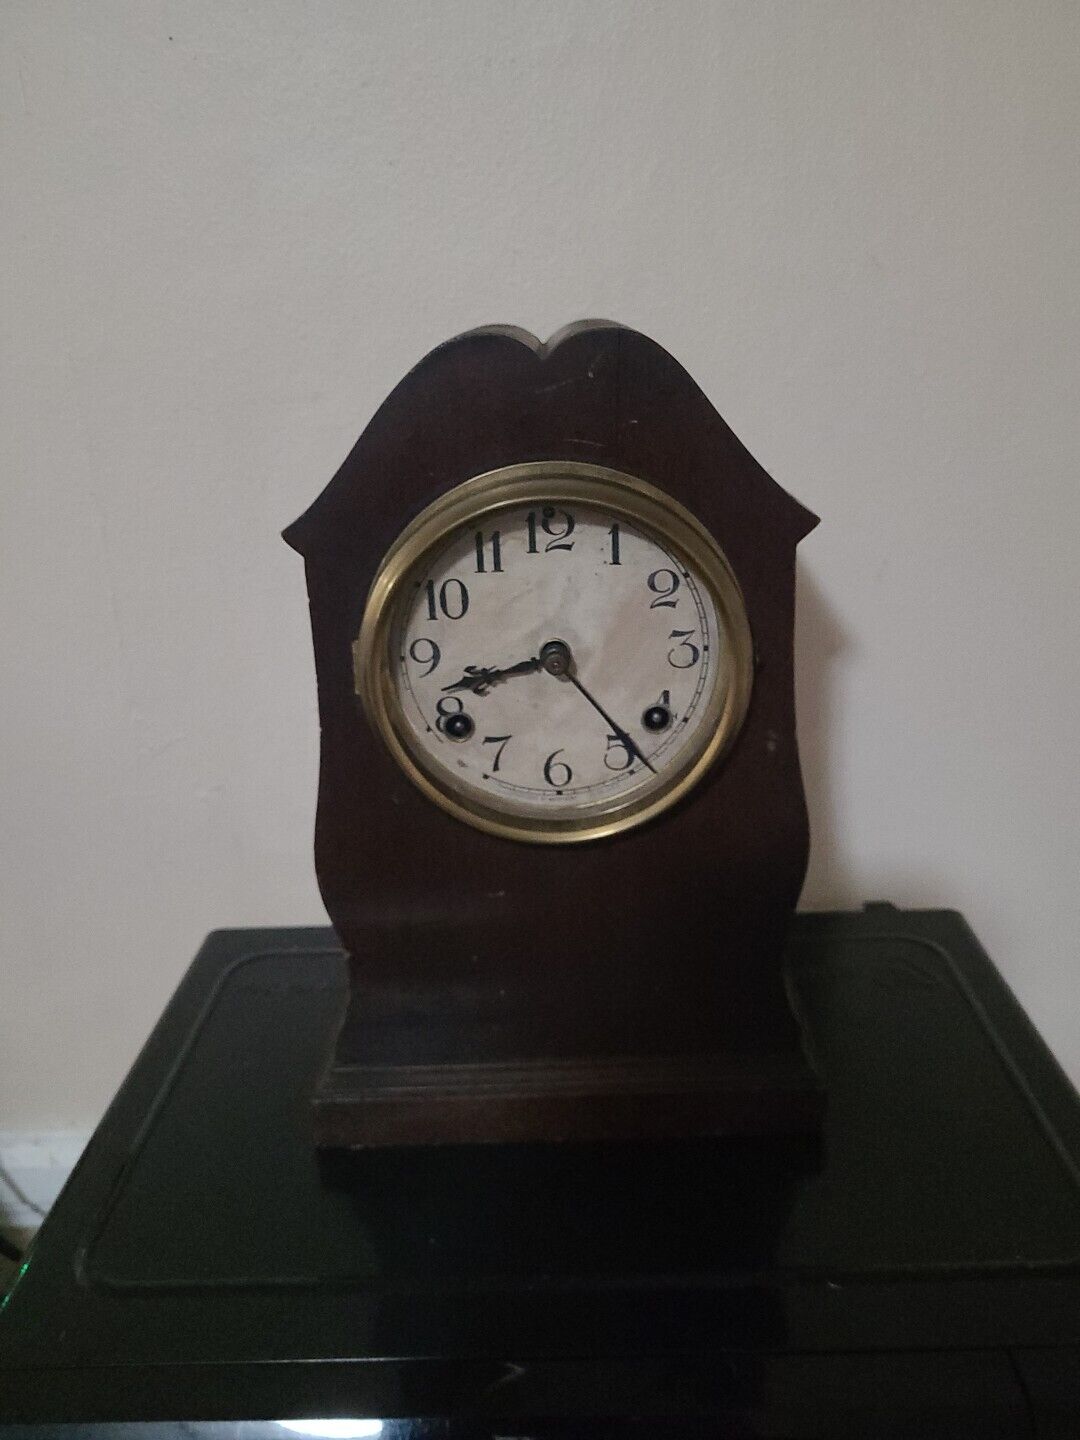 🔥🔥Antique Waterbury Chiming Mantle Clock Works 🔥🔥works And Chimes Still.